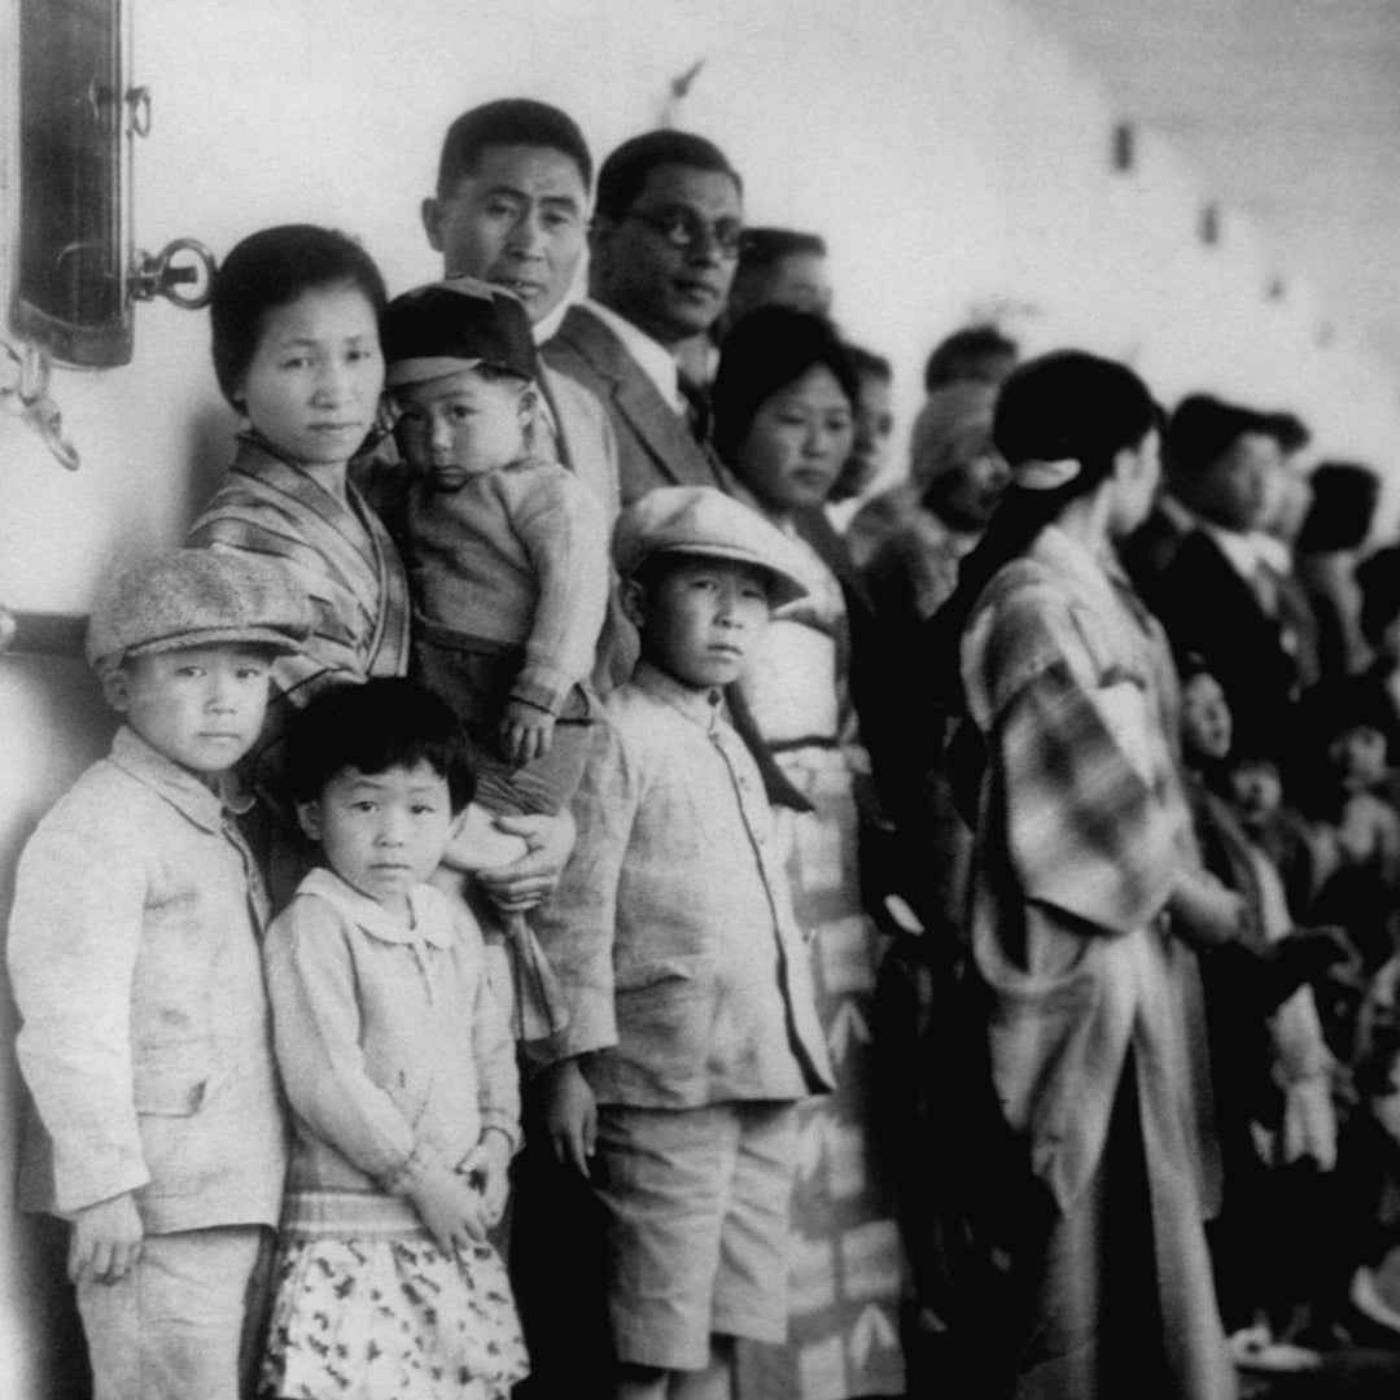 The Japanese Exclusion League